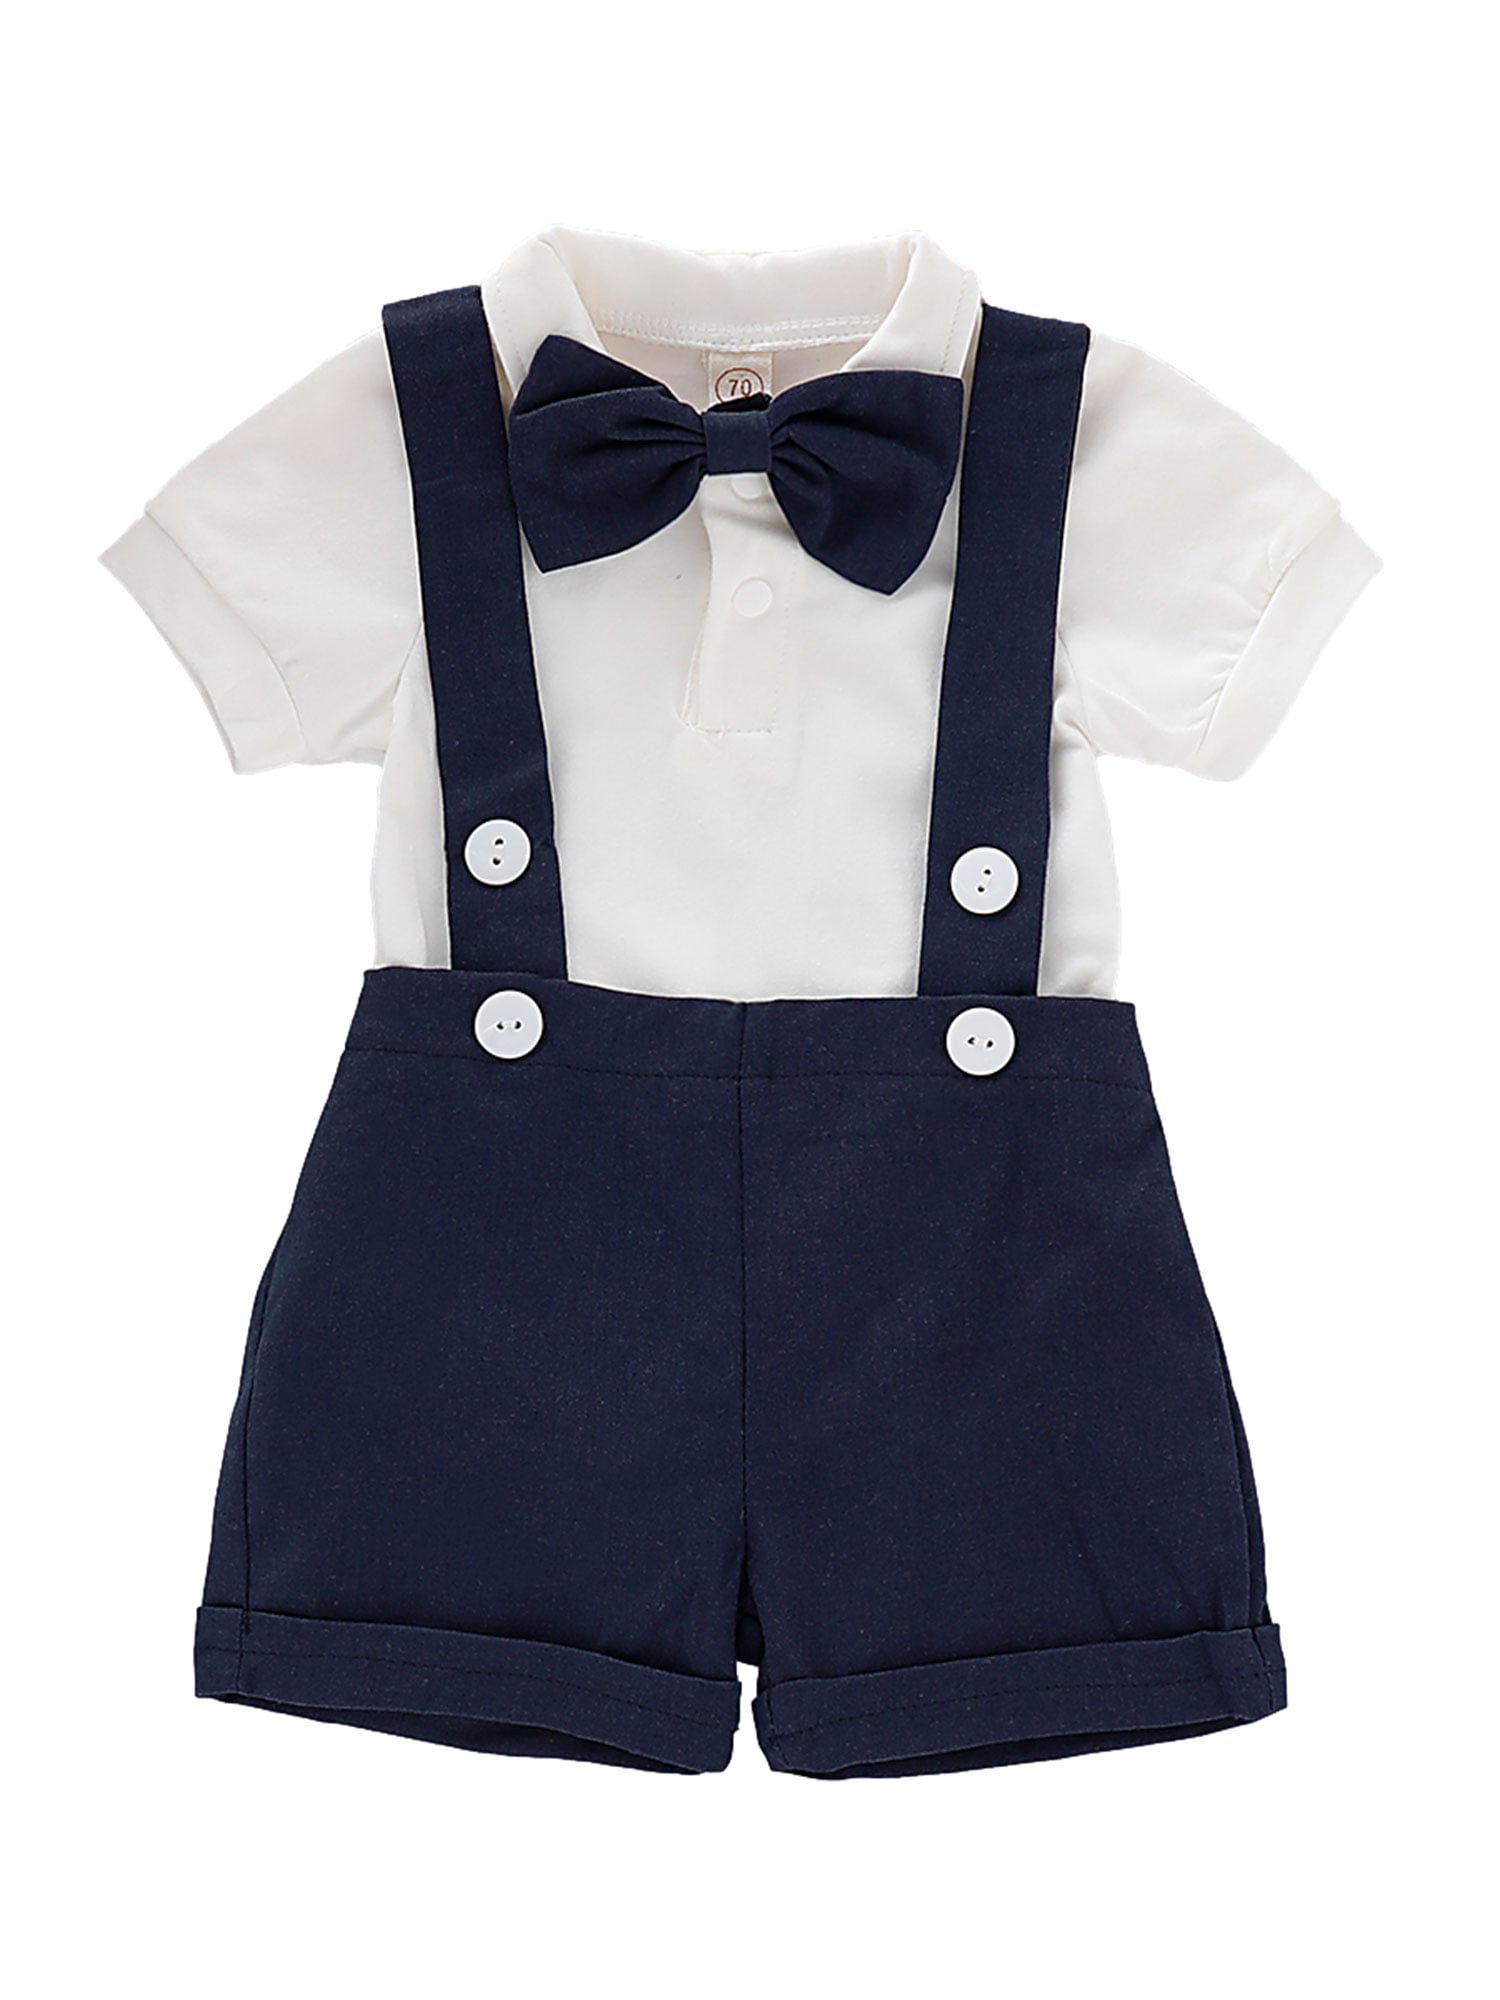 Details about   Toddler Baby Boys Gentleman Bow Tie Solid T-Shirt Tops+Suspender Pants Outfits 